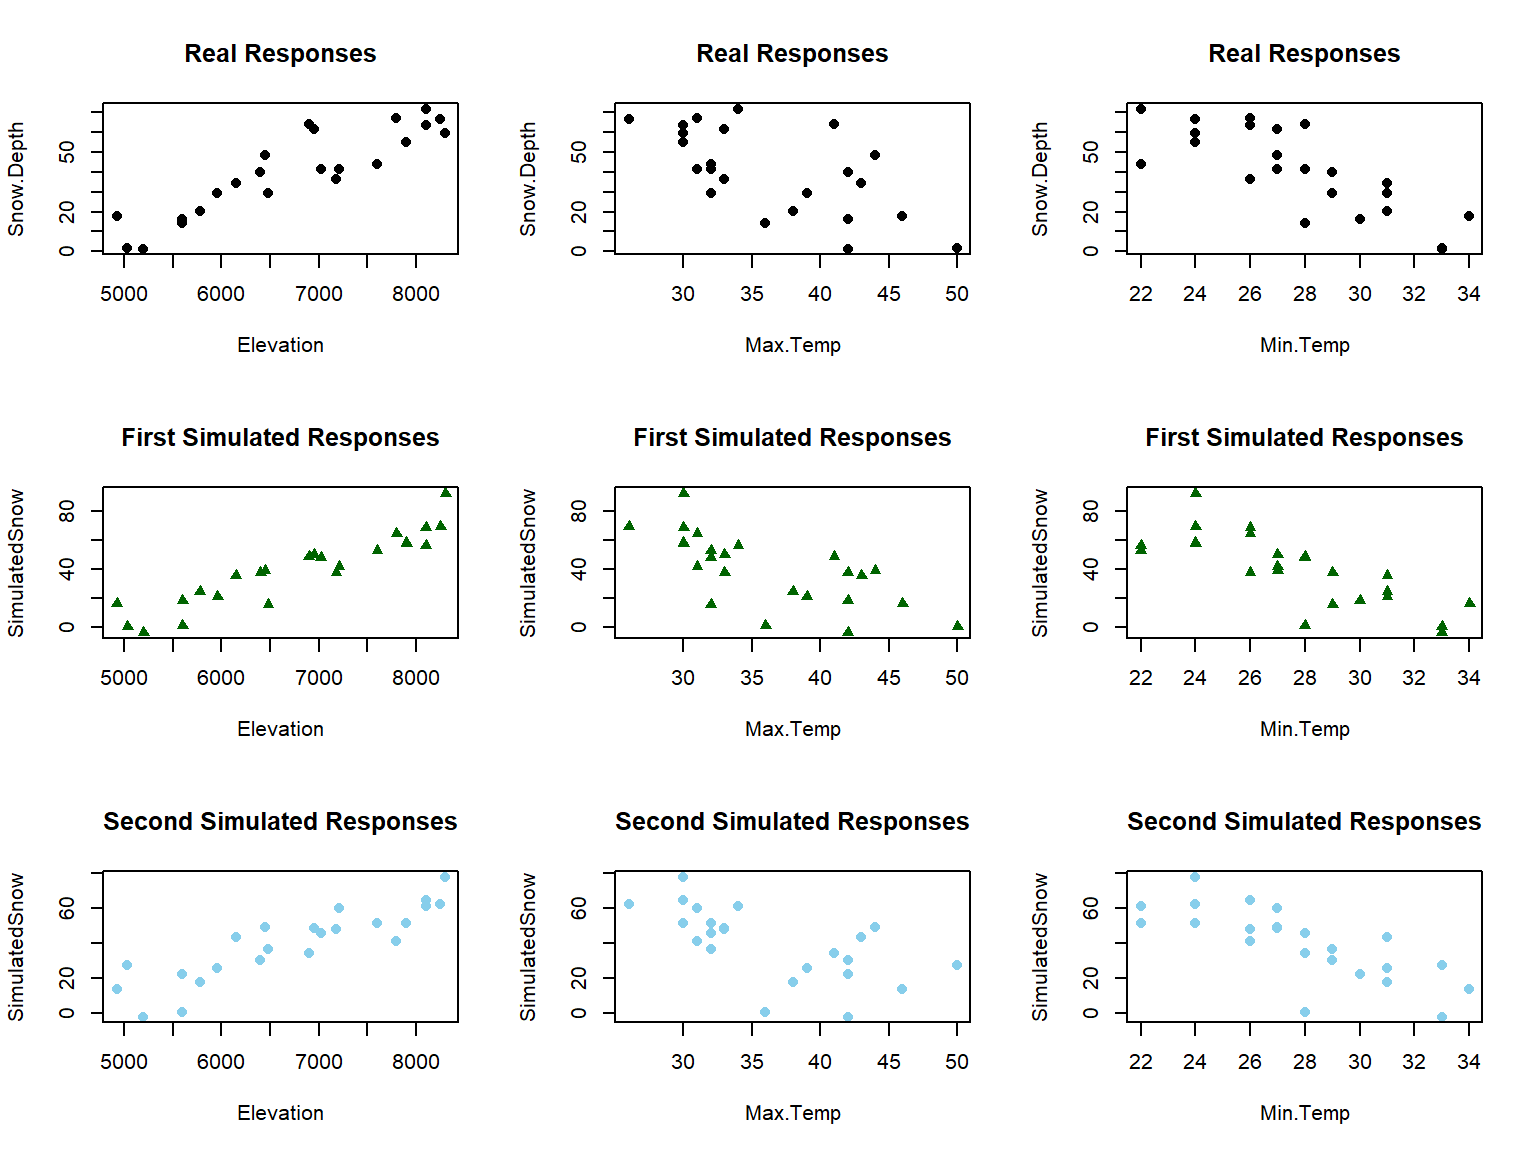 Plot of the original responses versus the three predictors (\(n\)=23 data set) in the top row and two sets of simulated responses versus the predictors in the bottom two rows.